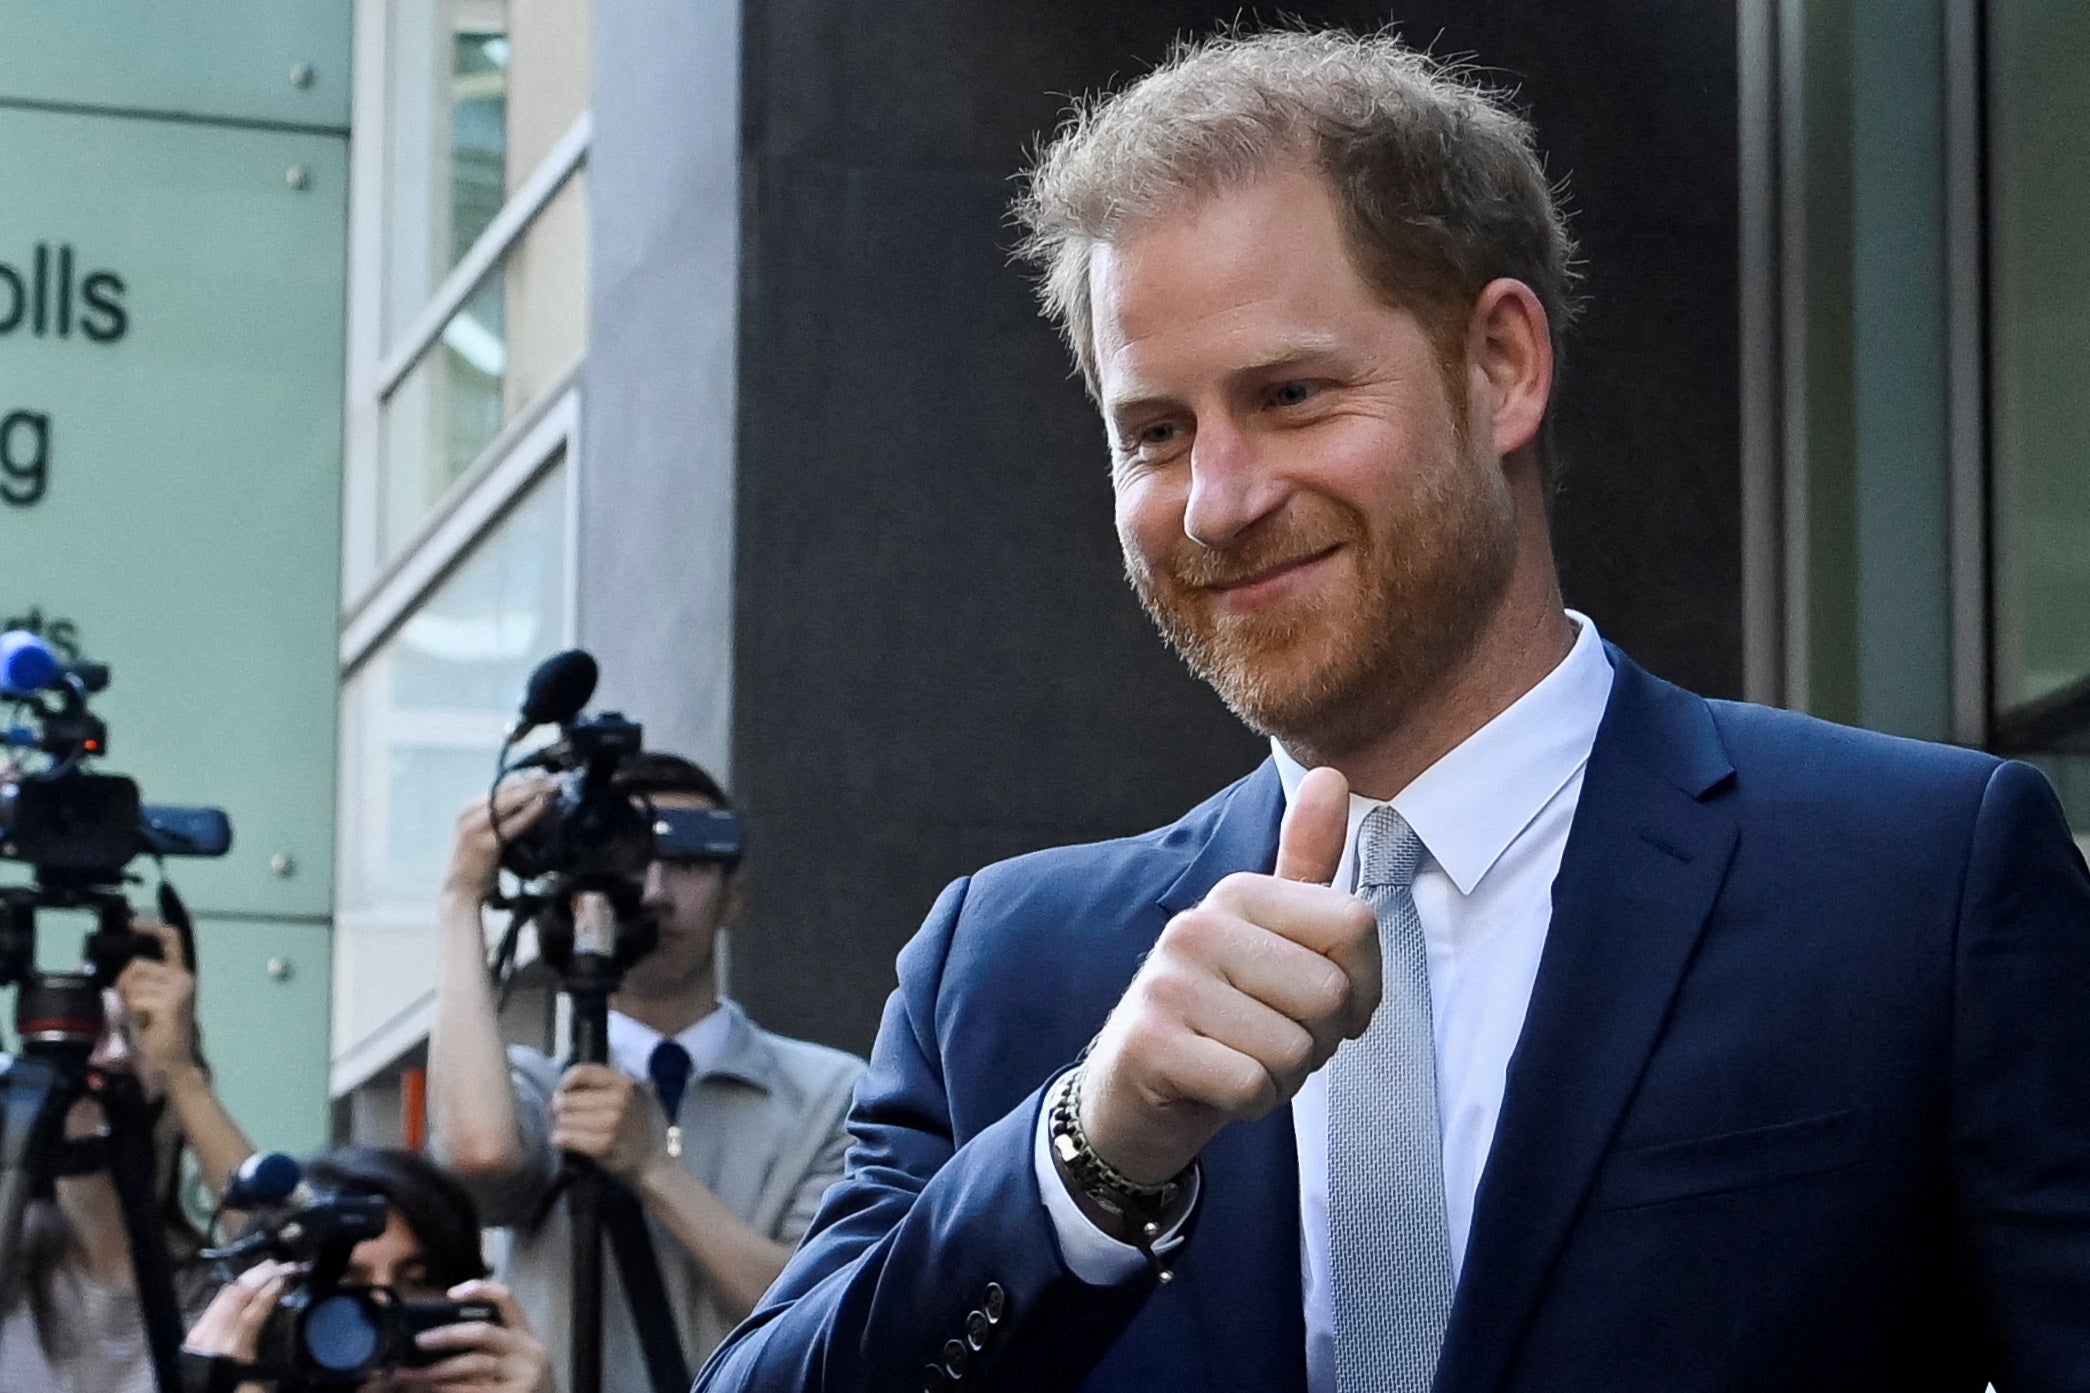 Prince Harry will not have senior royal company at the thanksgiving ceremony